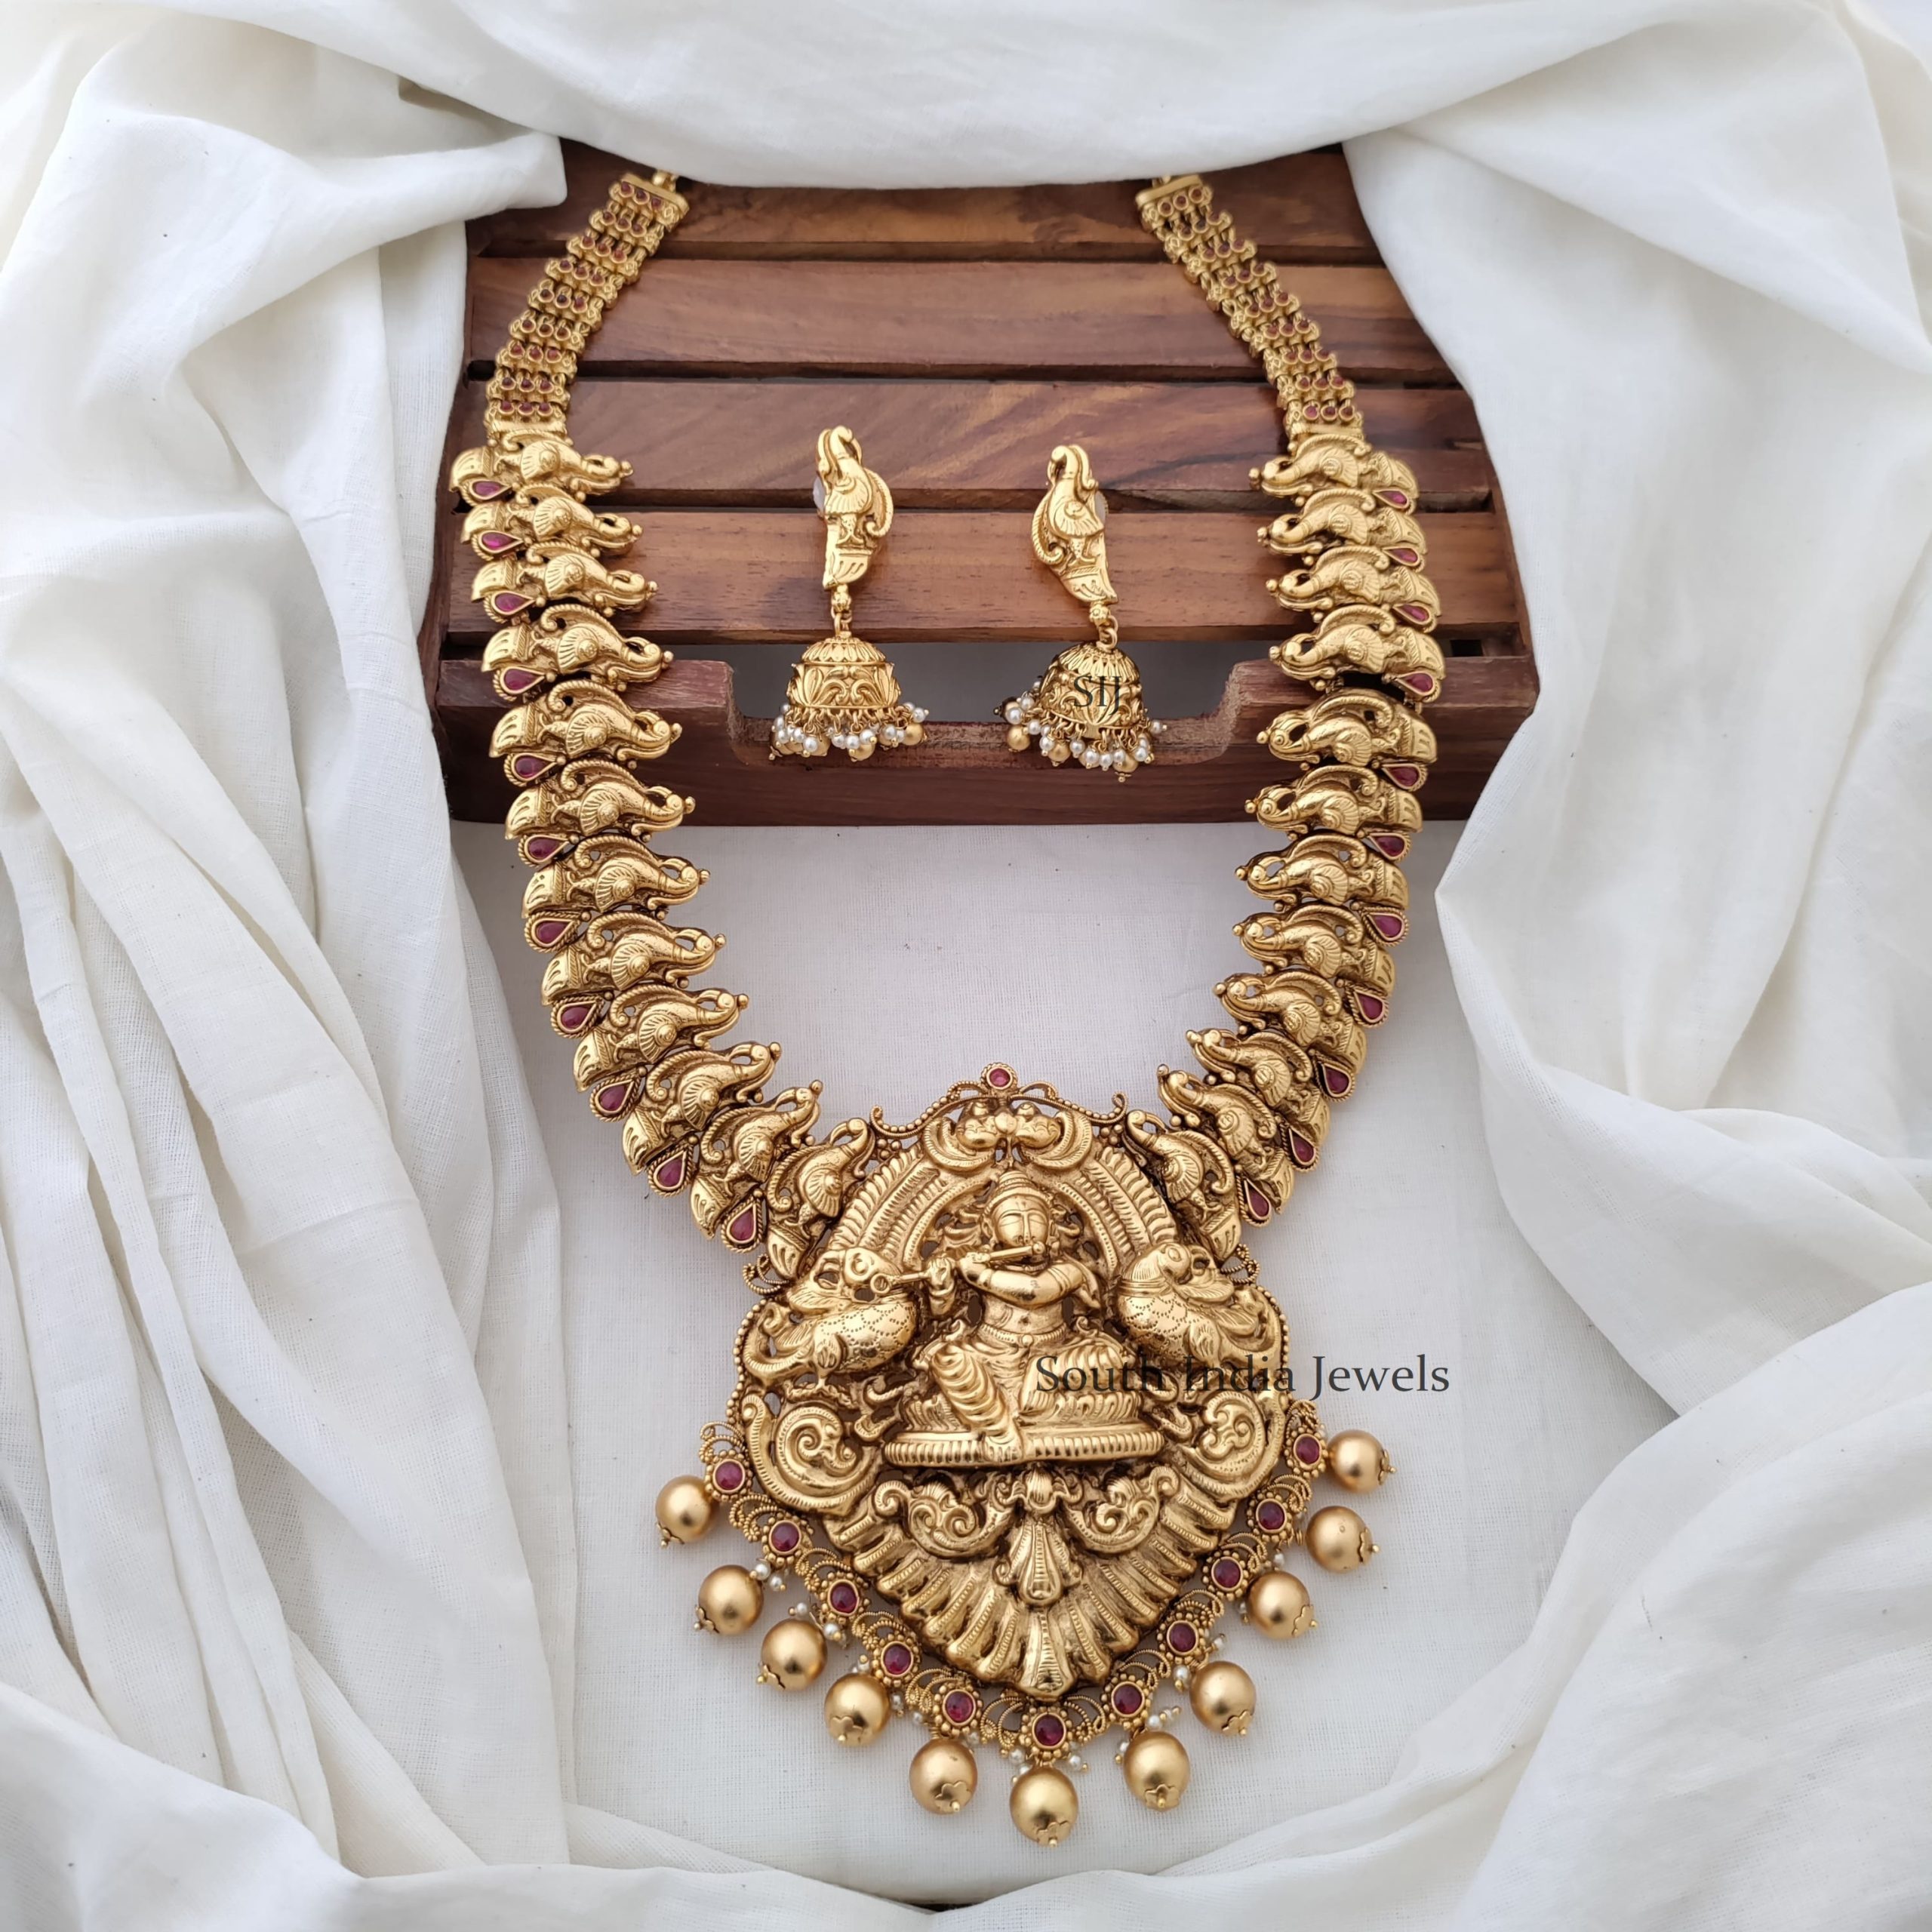 Krishna Design Necklace - South India Jewels Online Stores